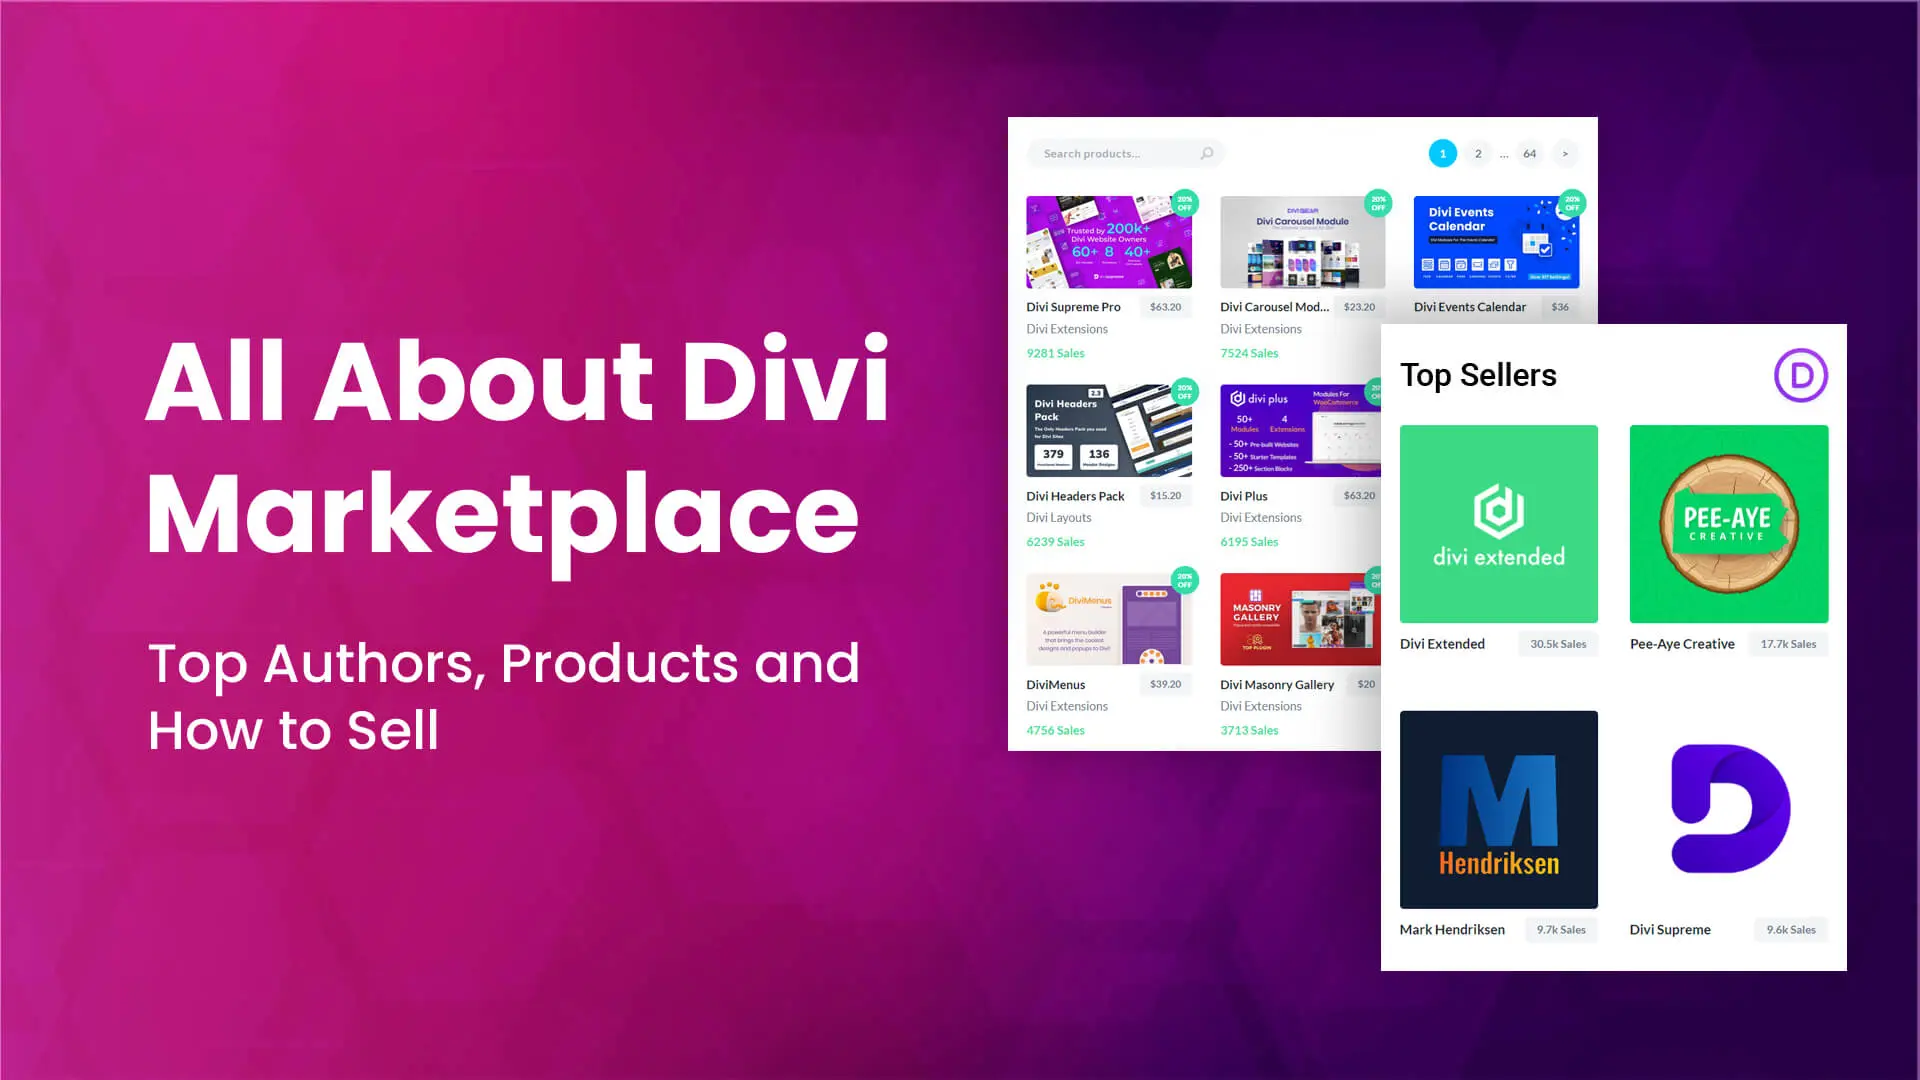 What's Divi theme marketplace top authors, products and how to sell